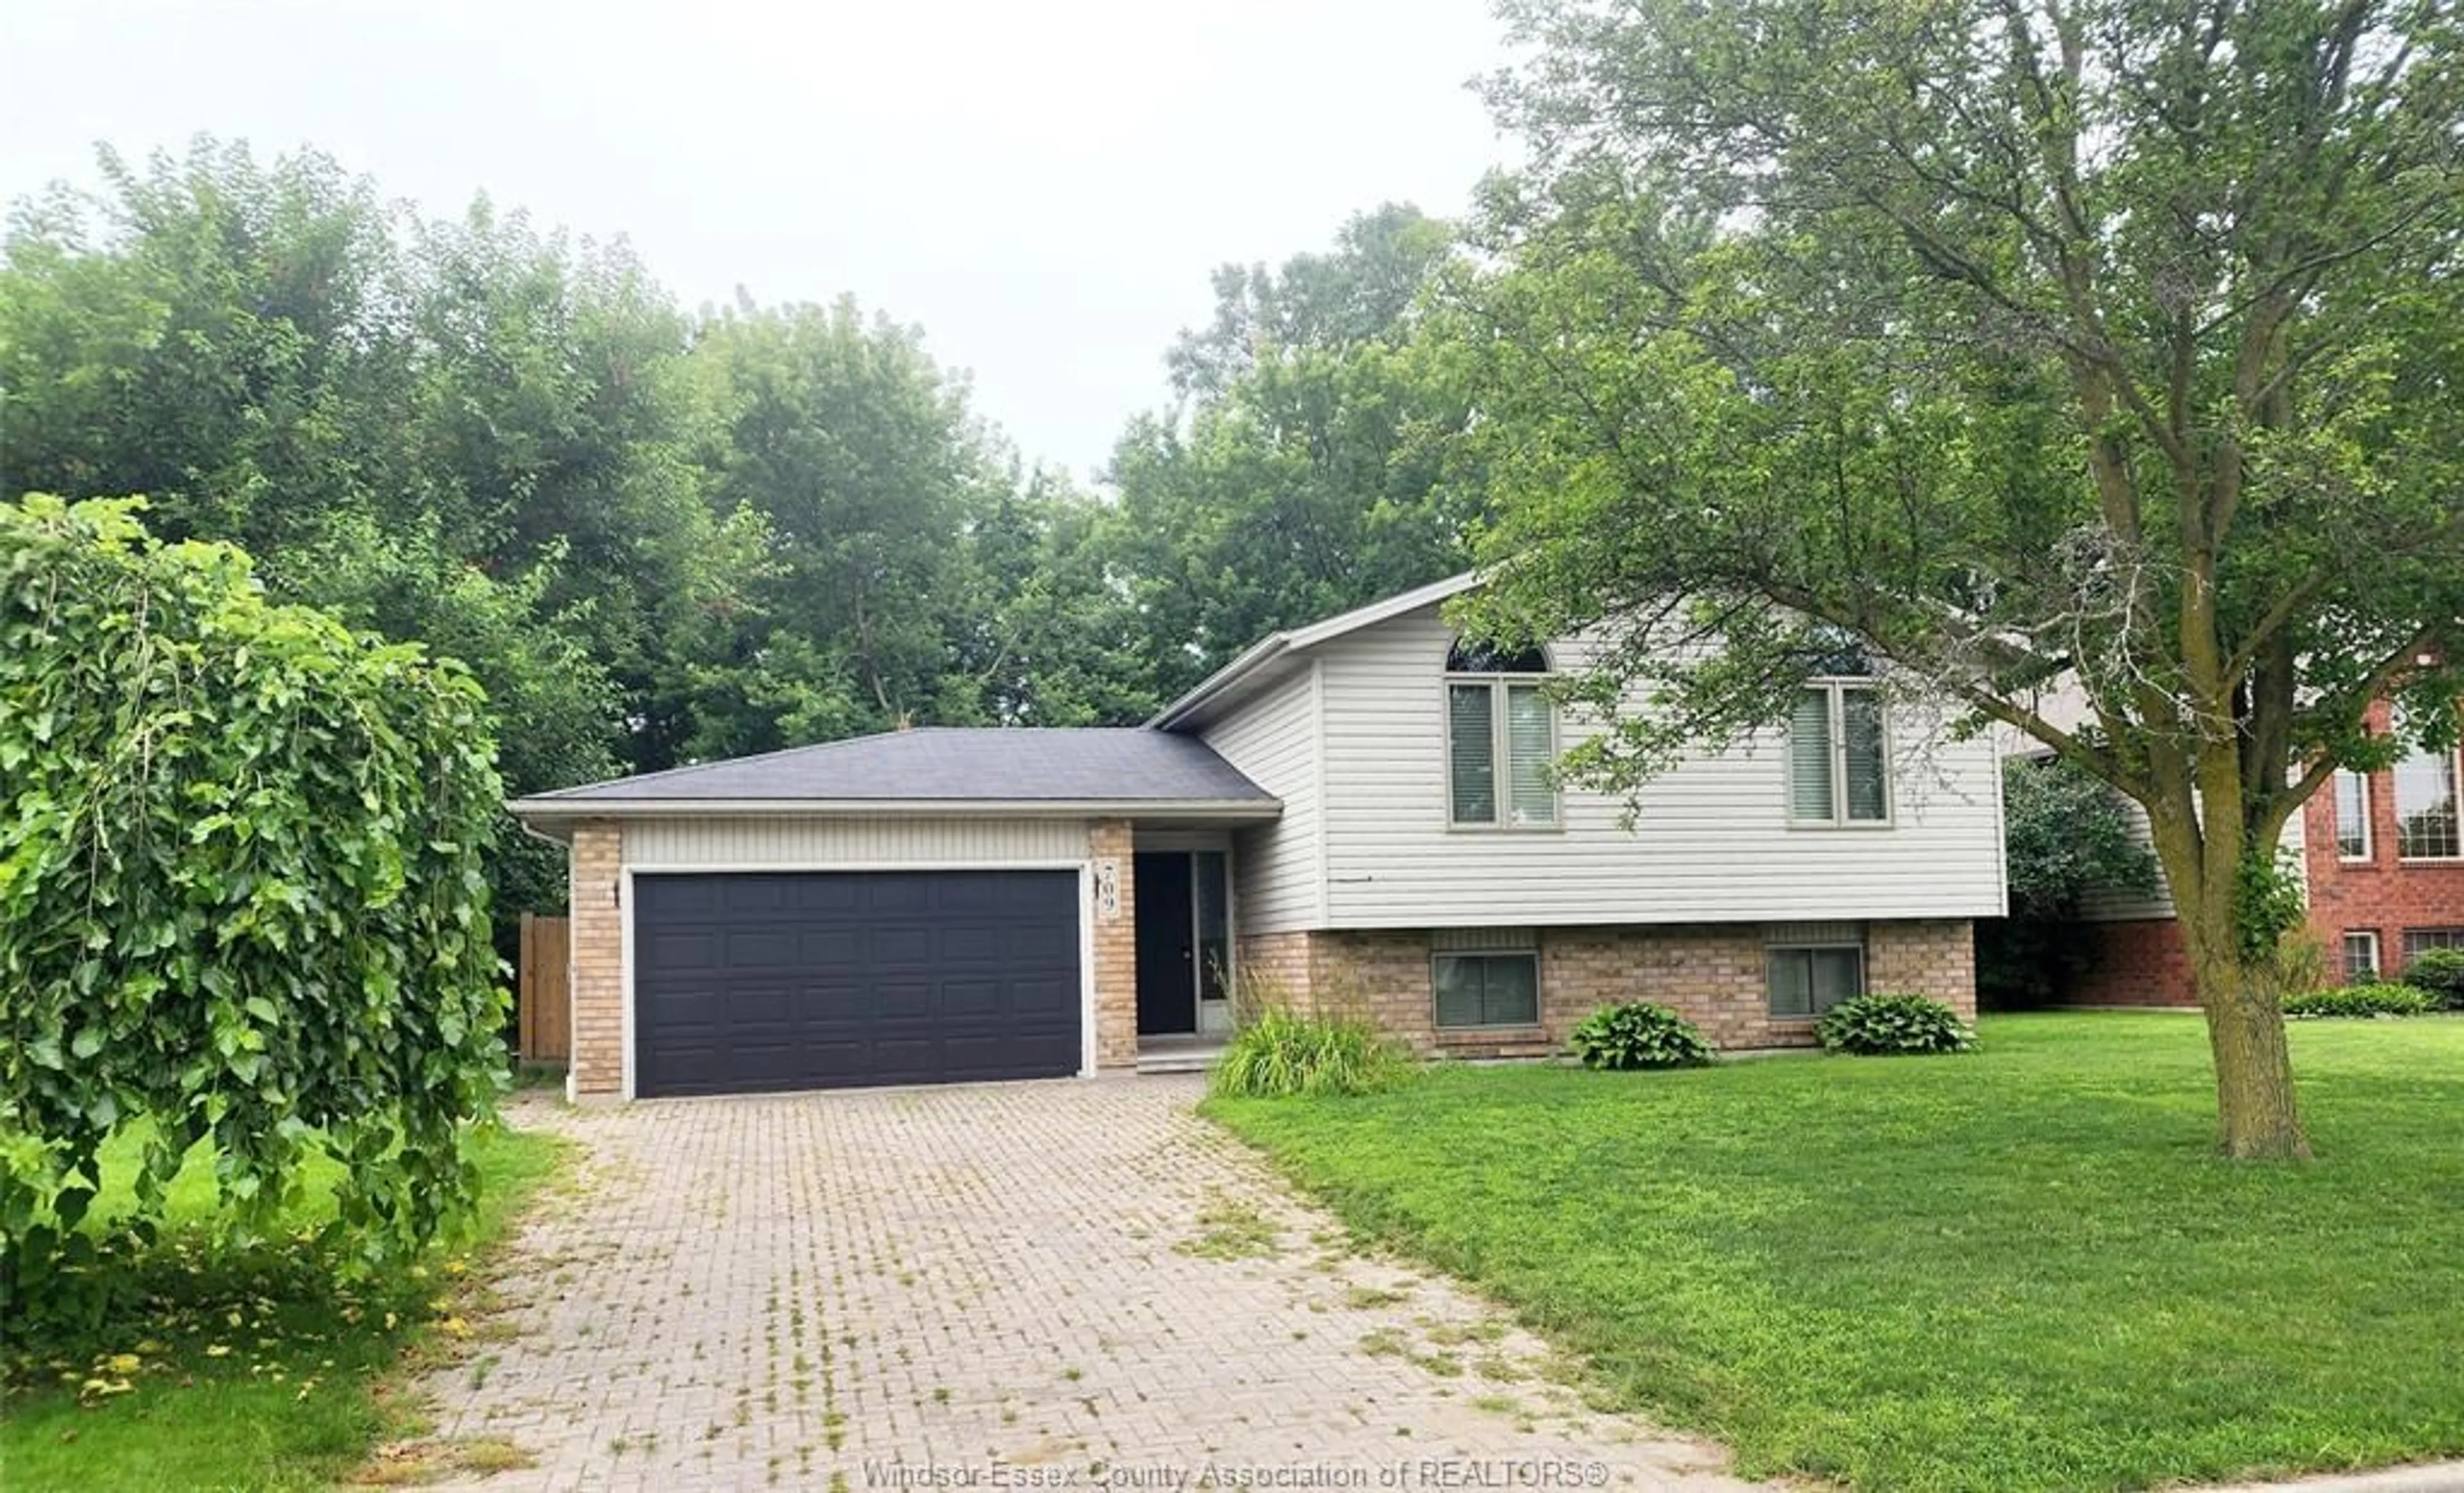 Home with brick exterior material for 709 RIVER Ave, LaSalle Ontario N9J 3K9